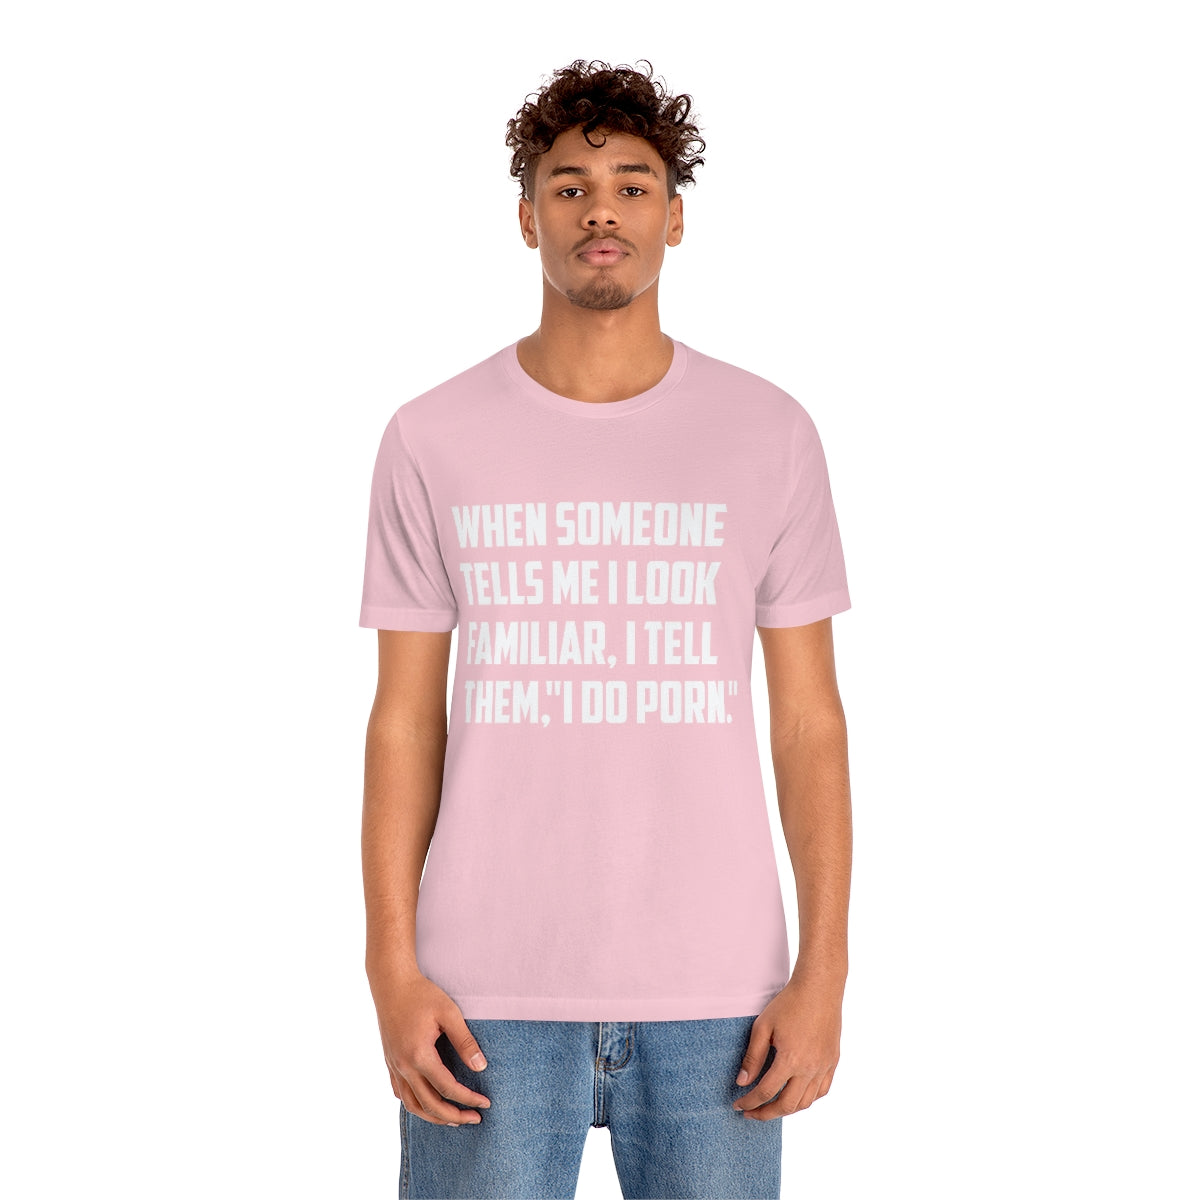 When Someone Tells Me I Look Familiar, I Tell Then I Do Porn - Unisex T-Shirt